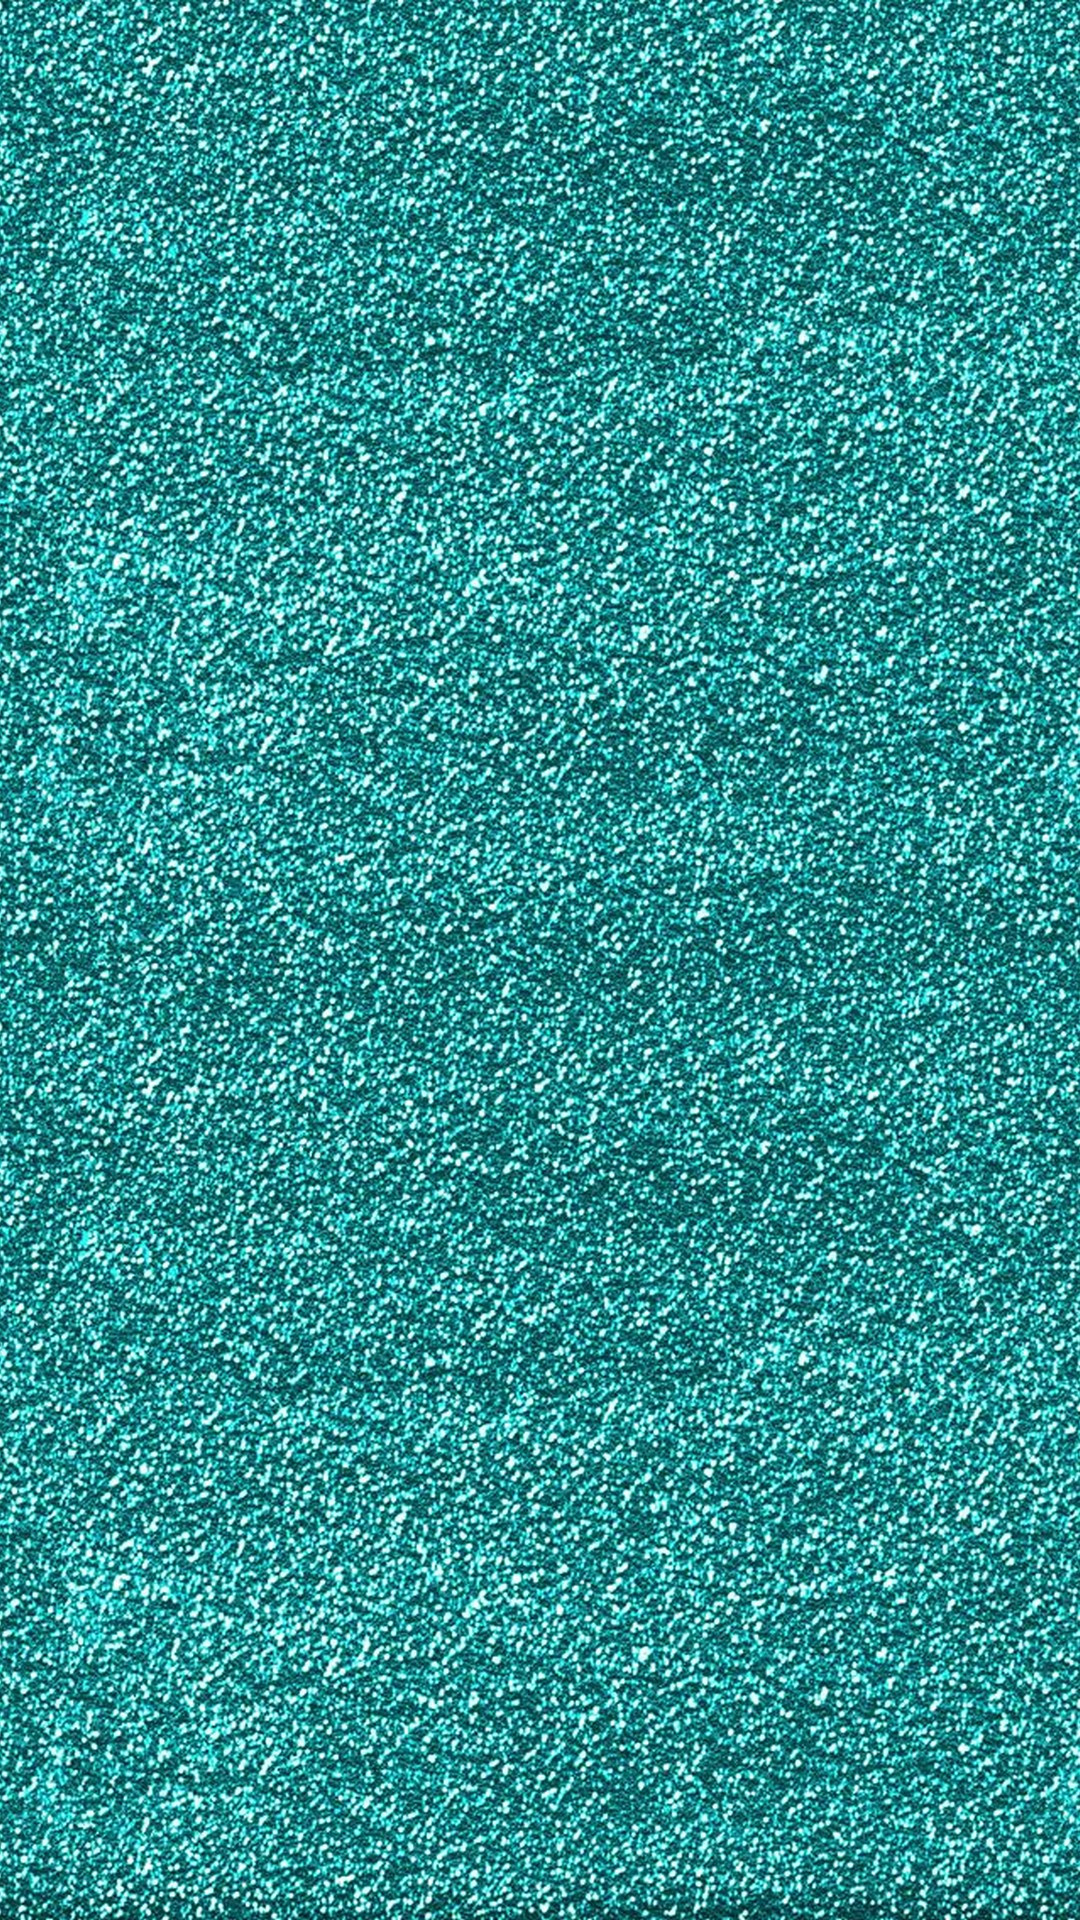 Emerald Green Wallpaper For iPhone with resolution 1080X1920 pixel. You can make this wallpaper for your iPhone 5, 6, 7, 8, X backgrounds, Mobile Screensaver, or iPad Lock Screen